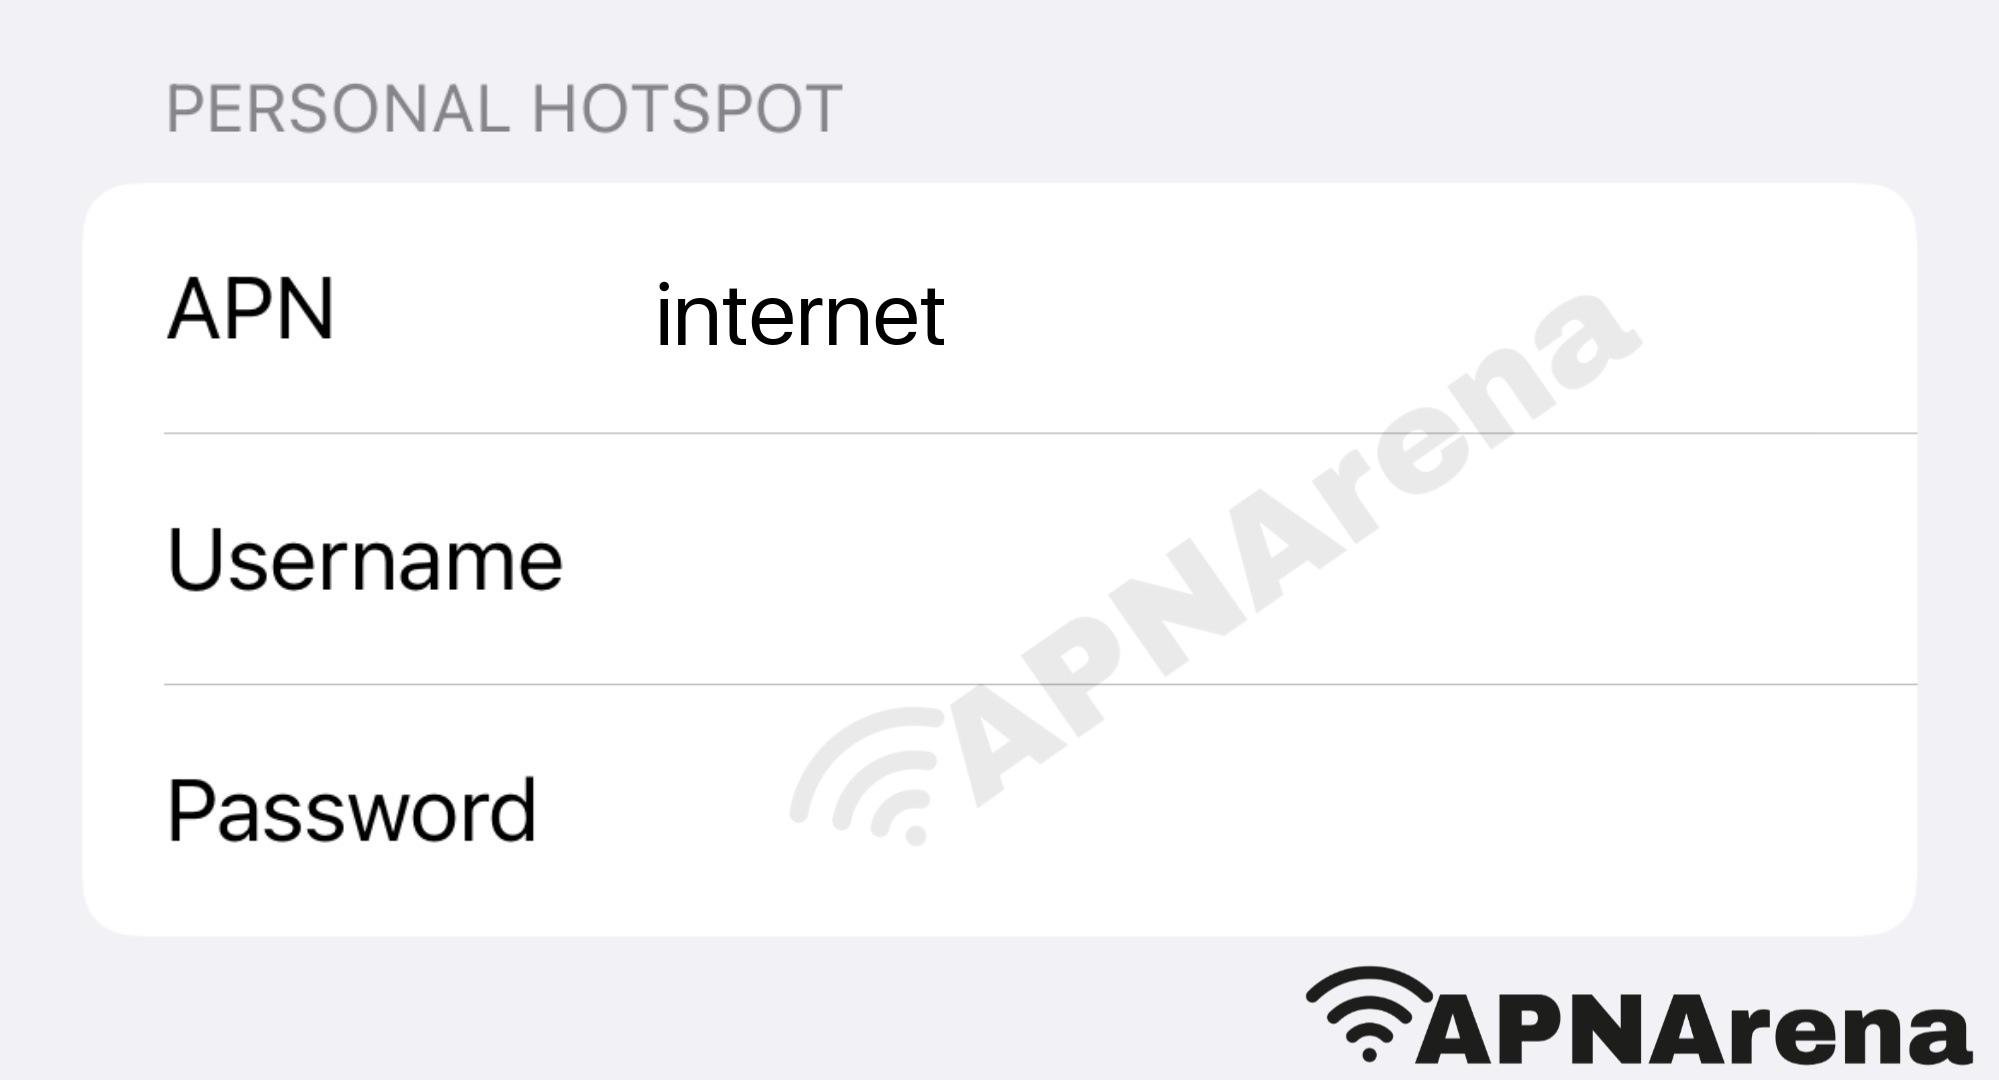 KT (olleh, KTF) Personal Hotspot Settings for iPhone